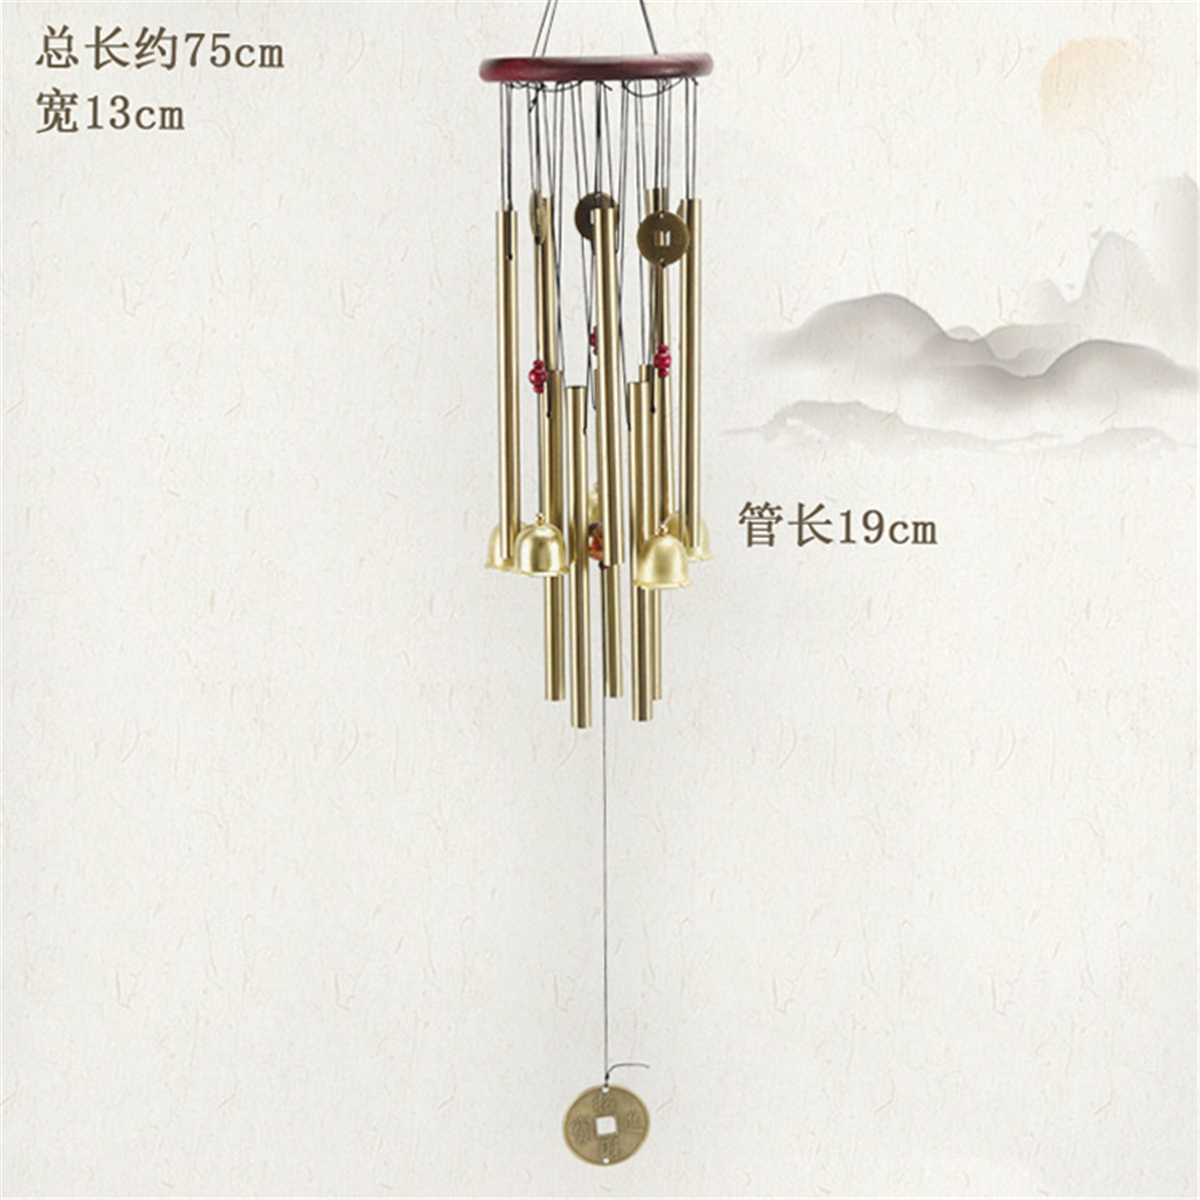 Wind-Chimes-Large-Tone-Resonant-Bell-10-Tubes-Chapel-Church-Garden-Decor-33quot-1694339-1